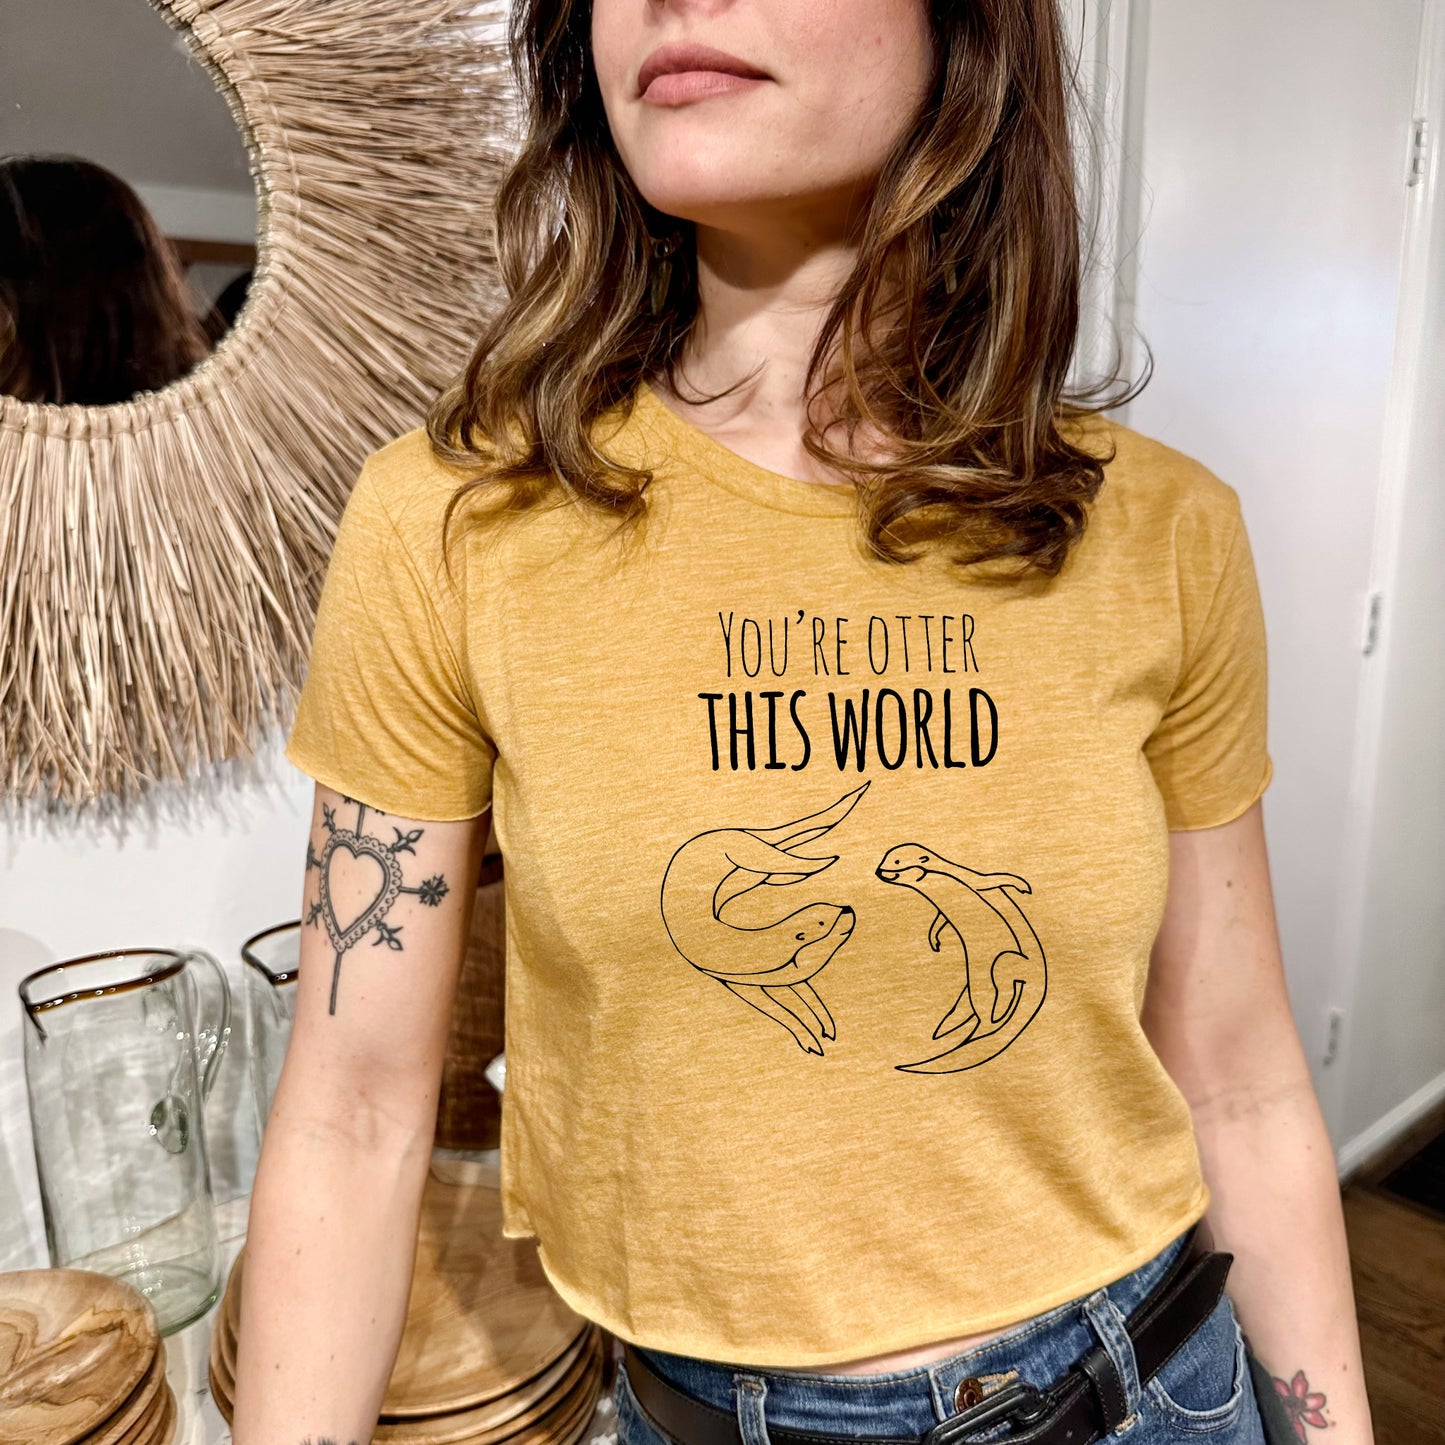 You're Otter This World - Women's Crop Tee - Heather Gray or Gold